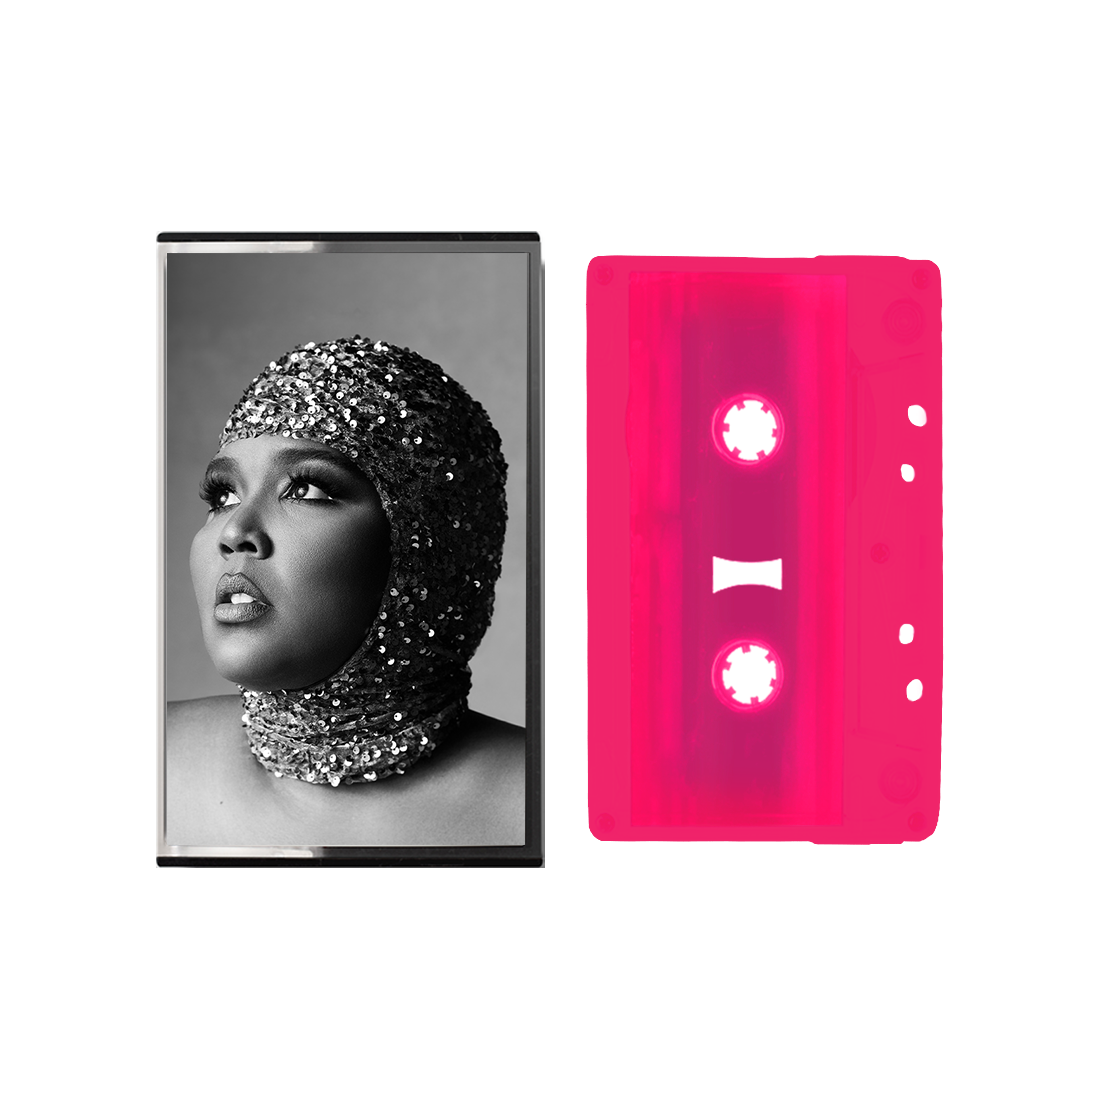 Special Pink Cassette